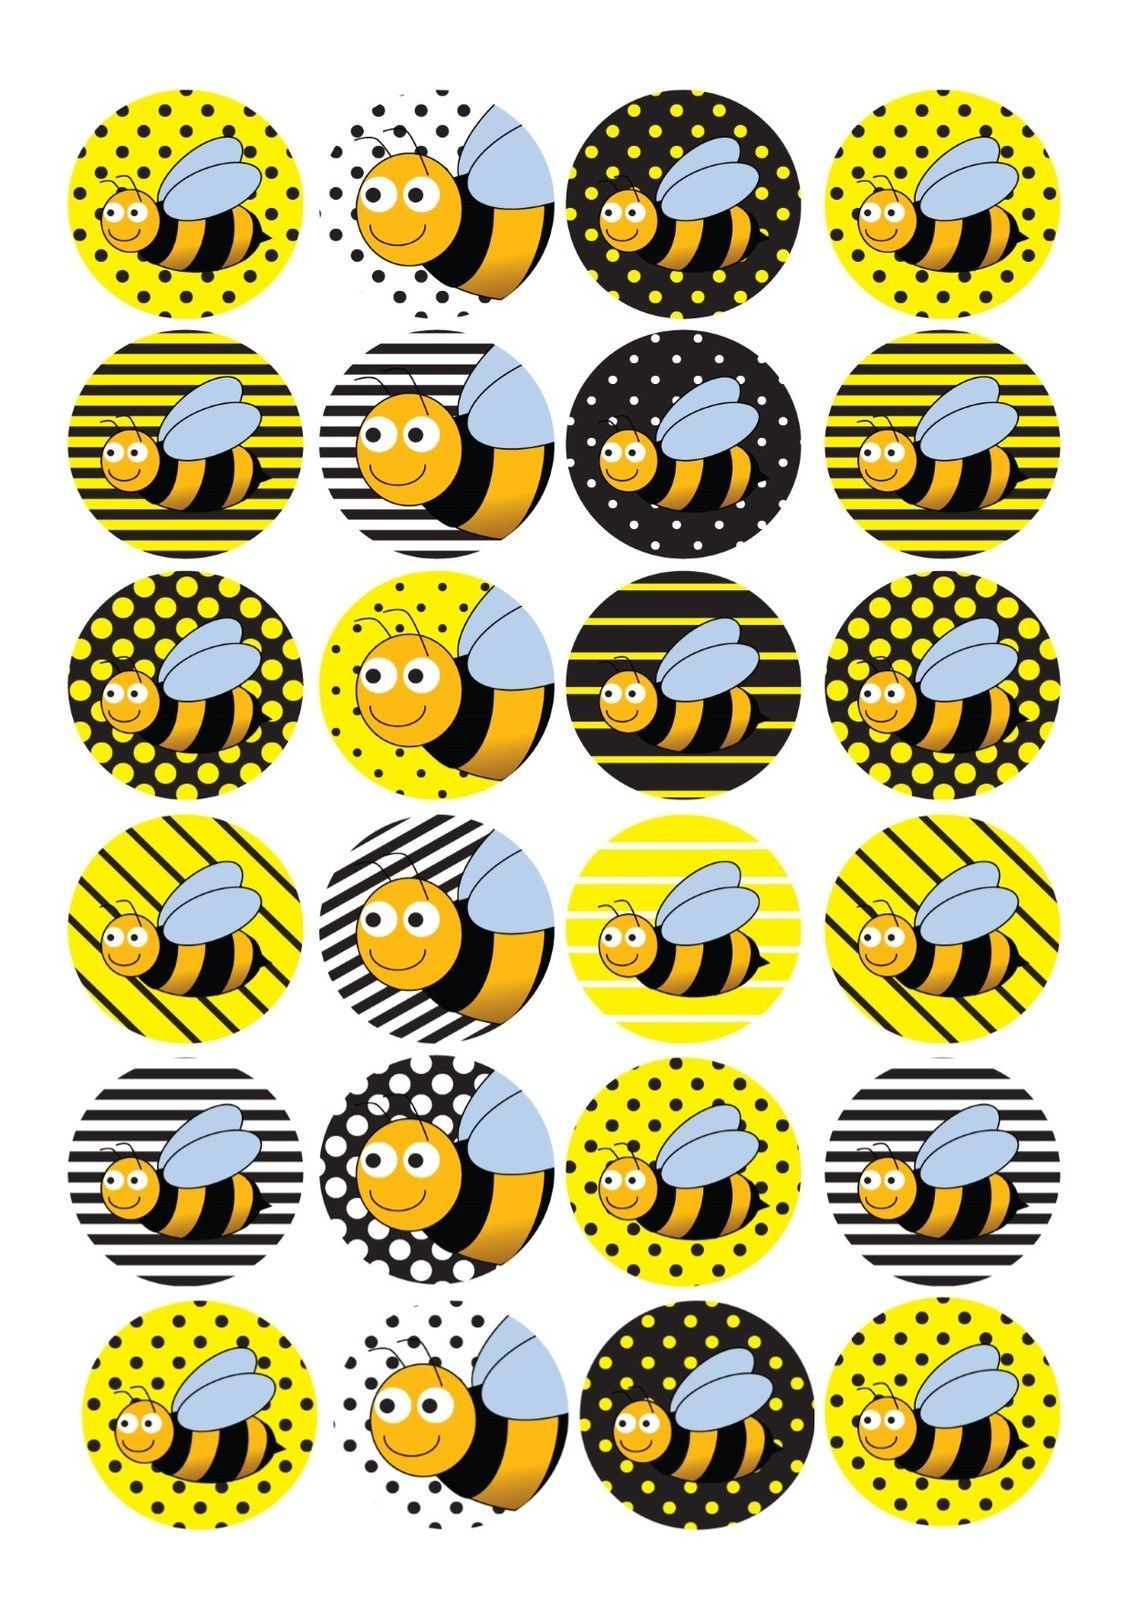 Bumblebee Papercraft 24 Edible Cake toppers Decorations Bumblebee Bee Insect New Baby